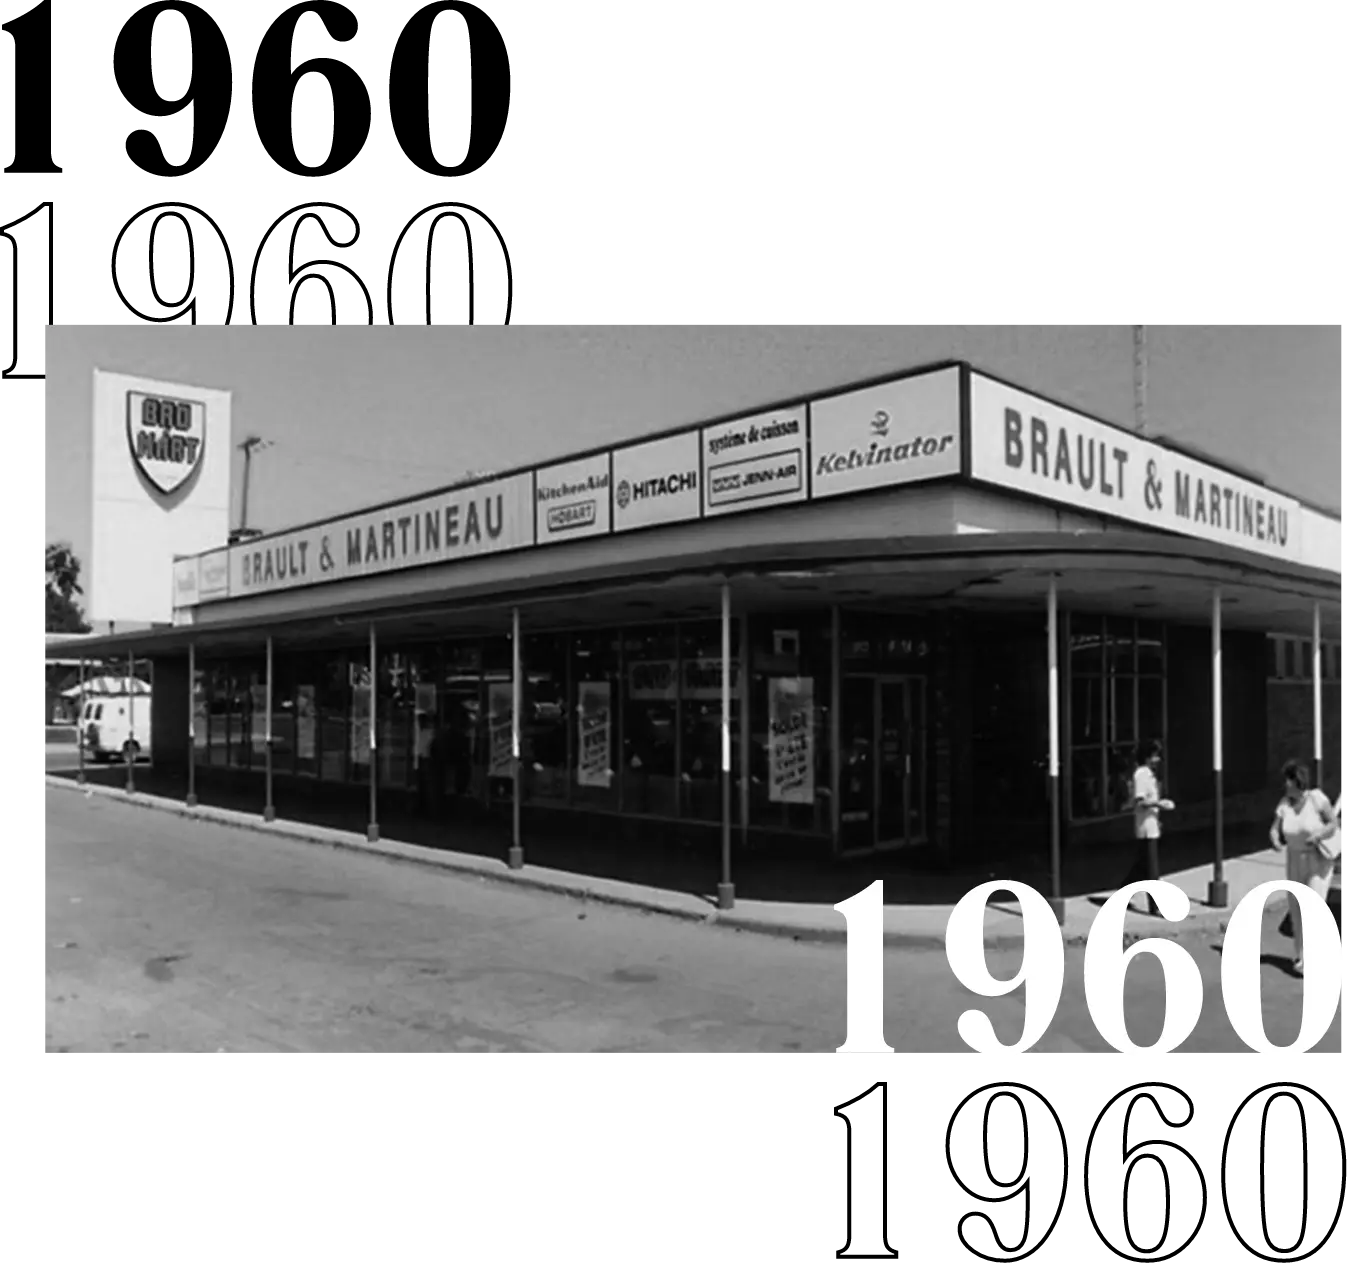 Brault et Martineau's first store in 1960